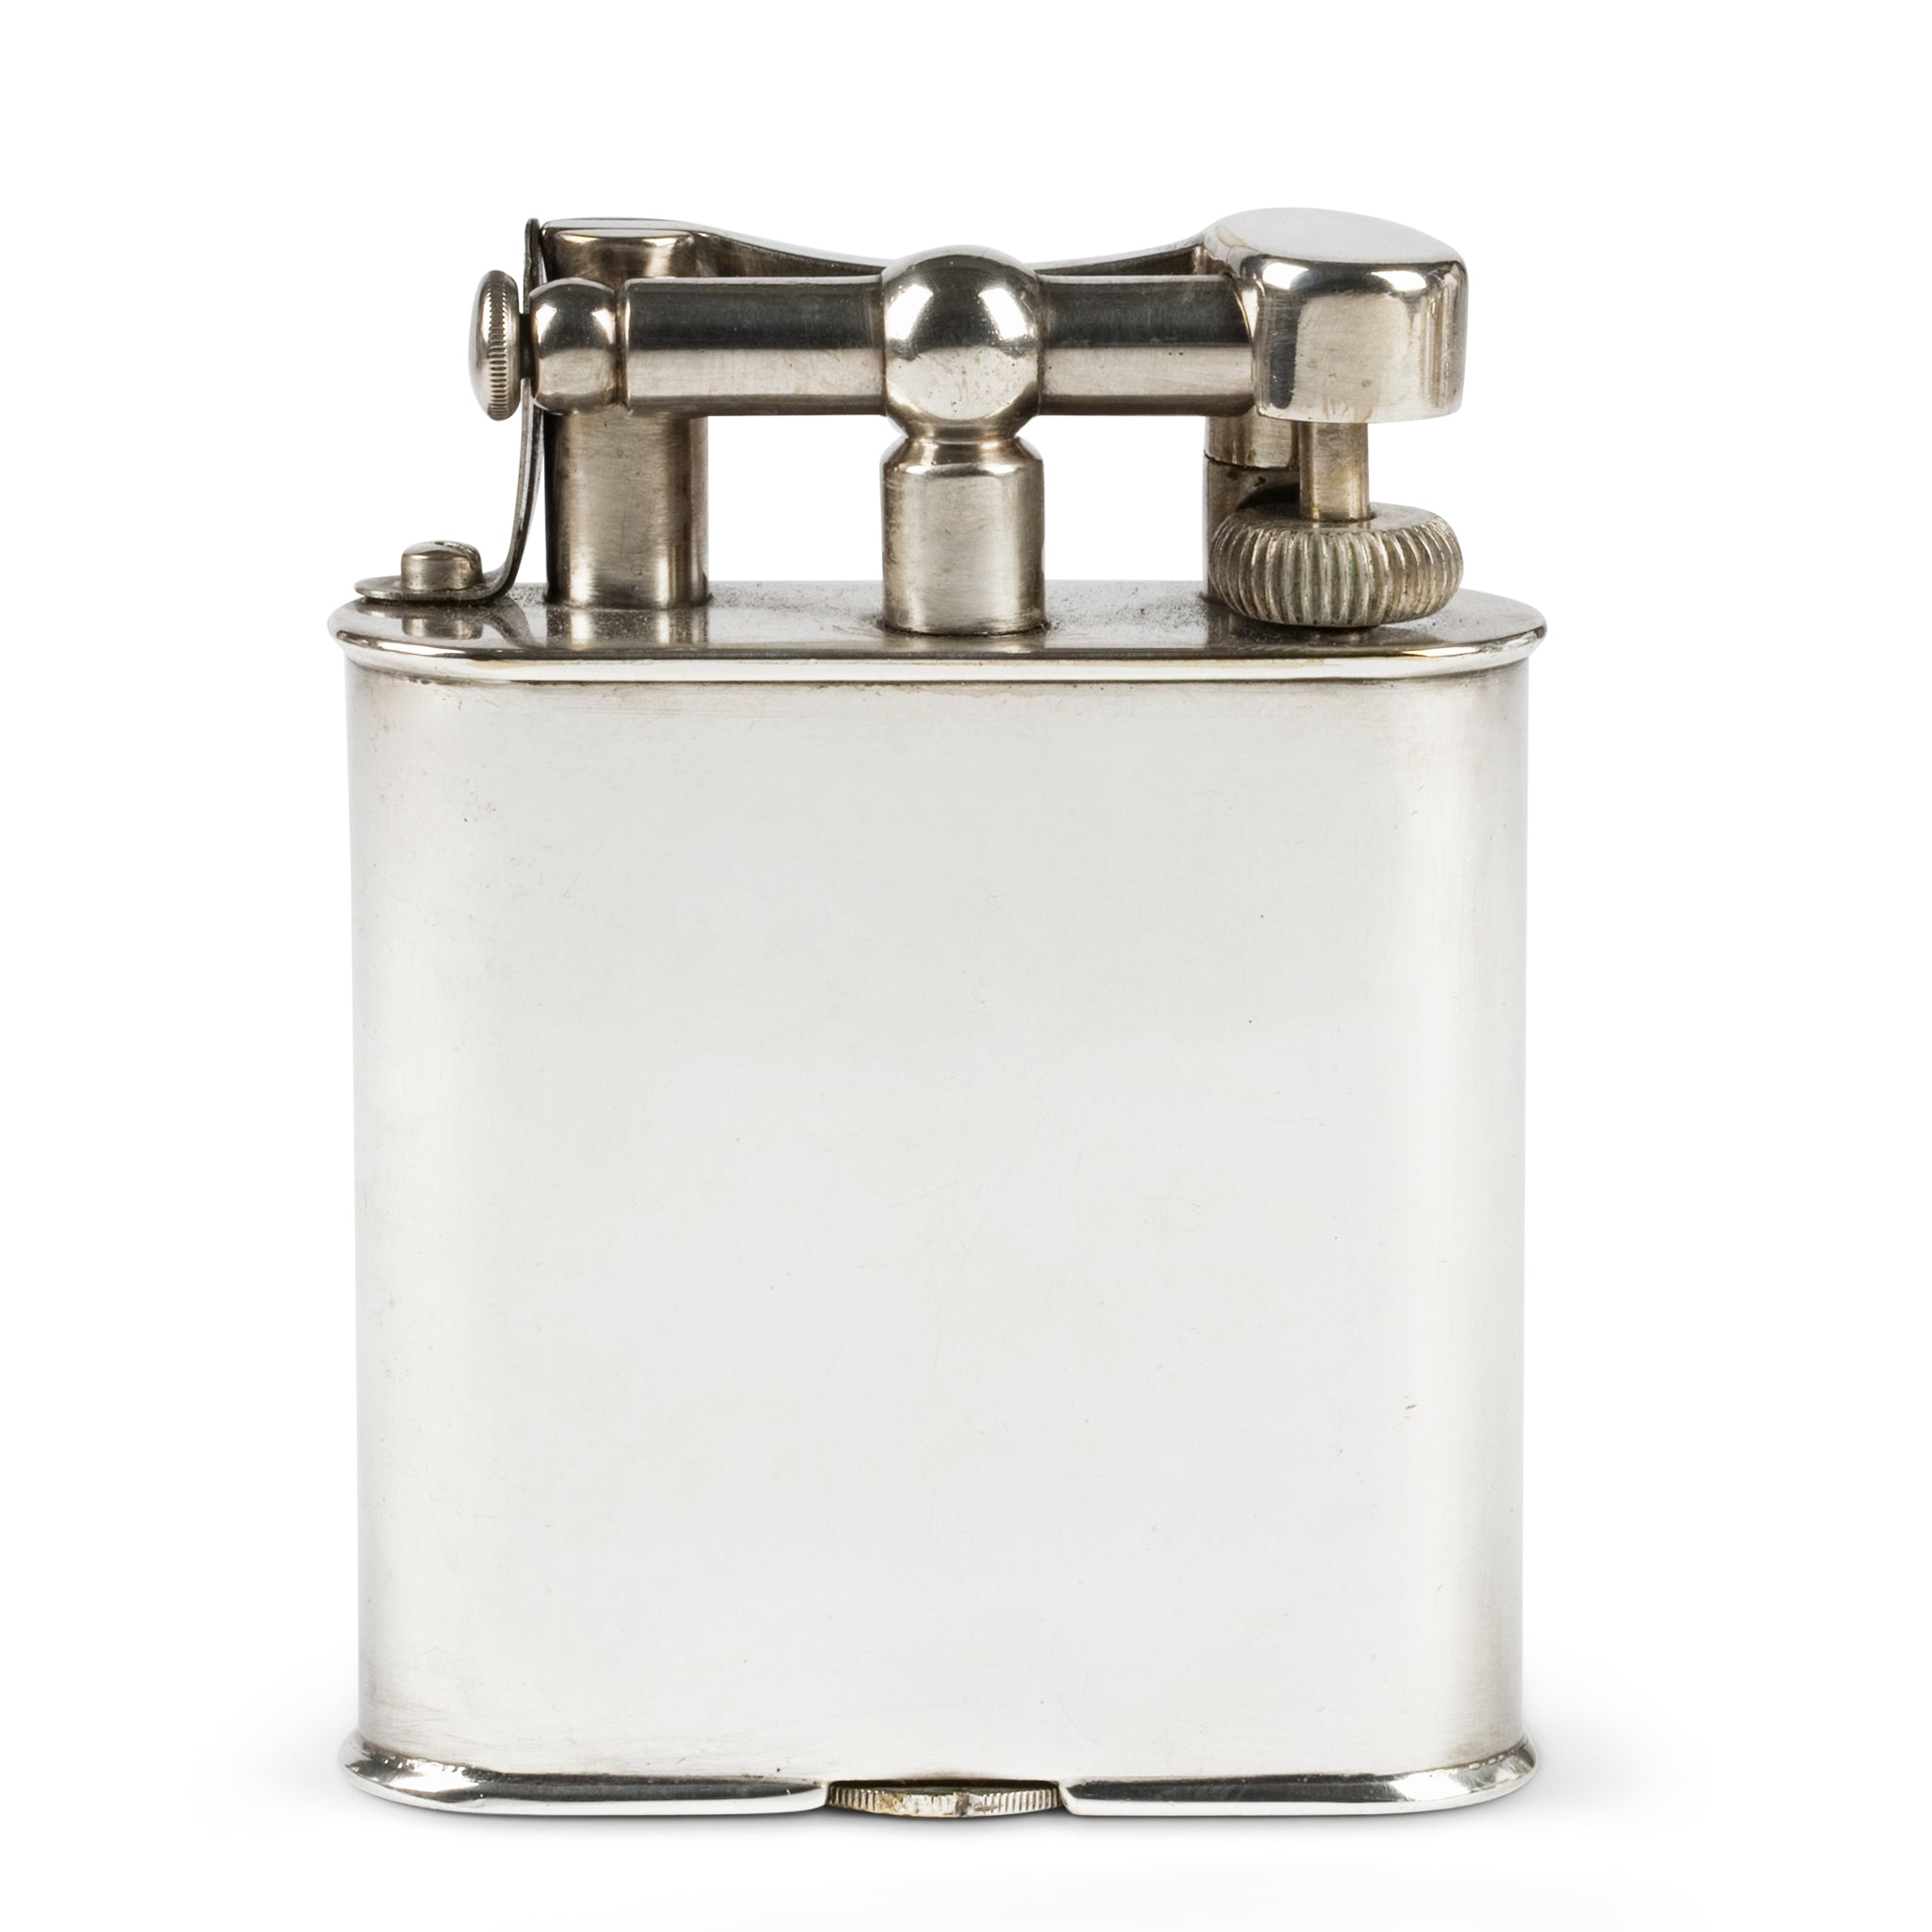 Dunhill Silver Lift-Arm Table Lighter